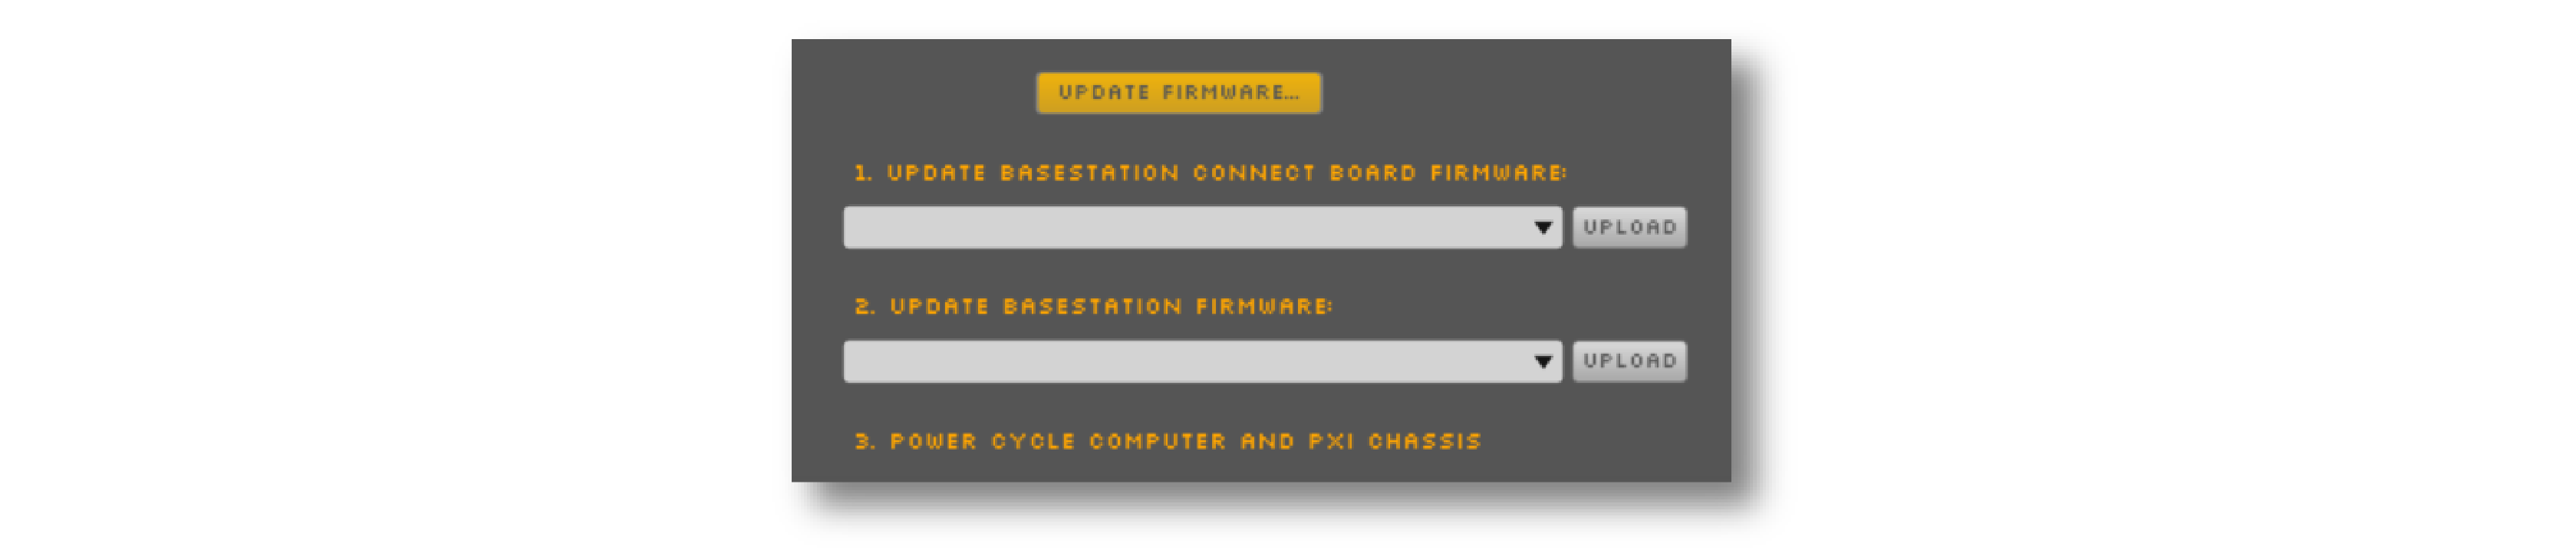 Interface for updating firmware